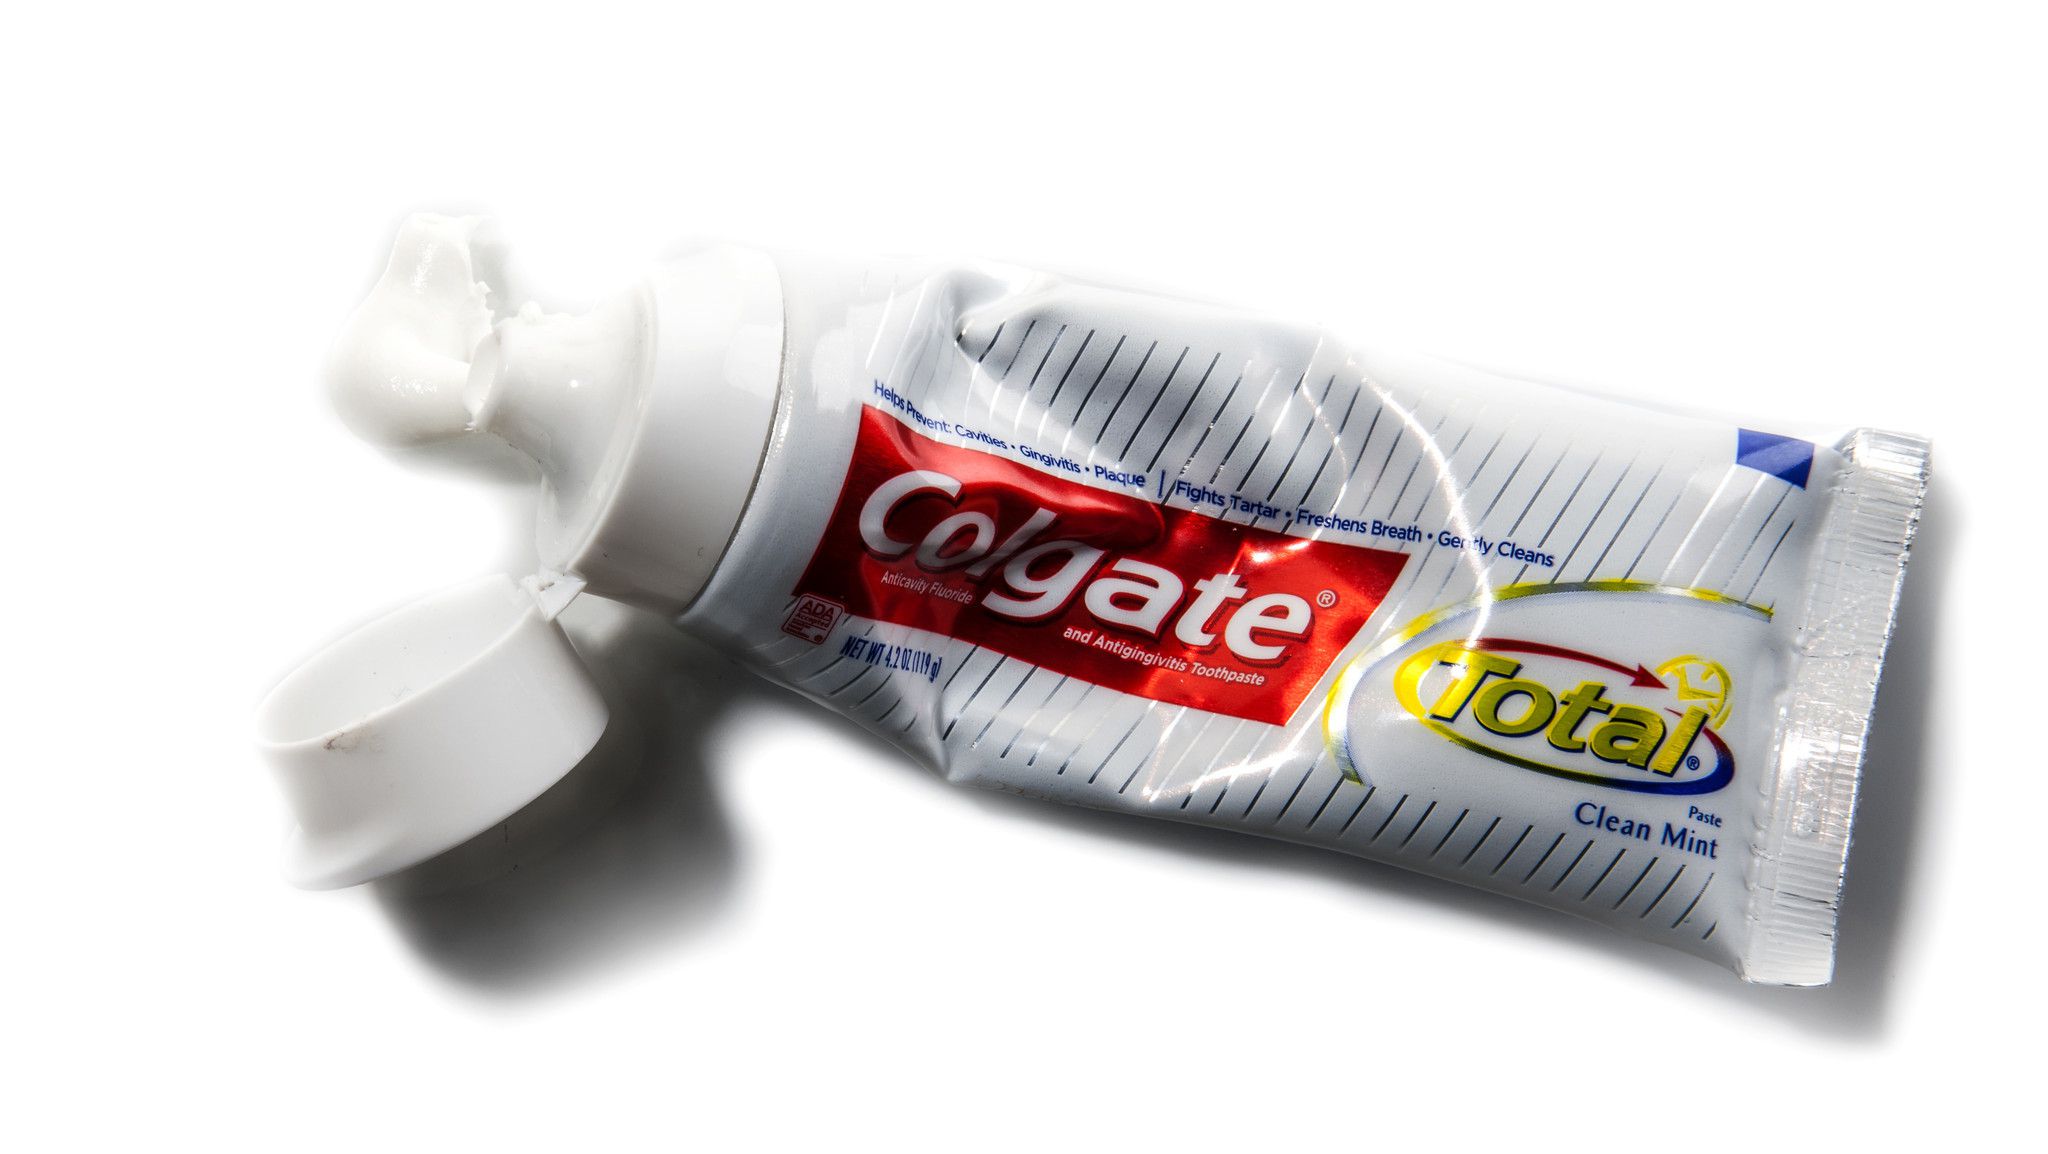 Procter & Gamble Eliminating Phthalates, Triclosan from Products